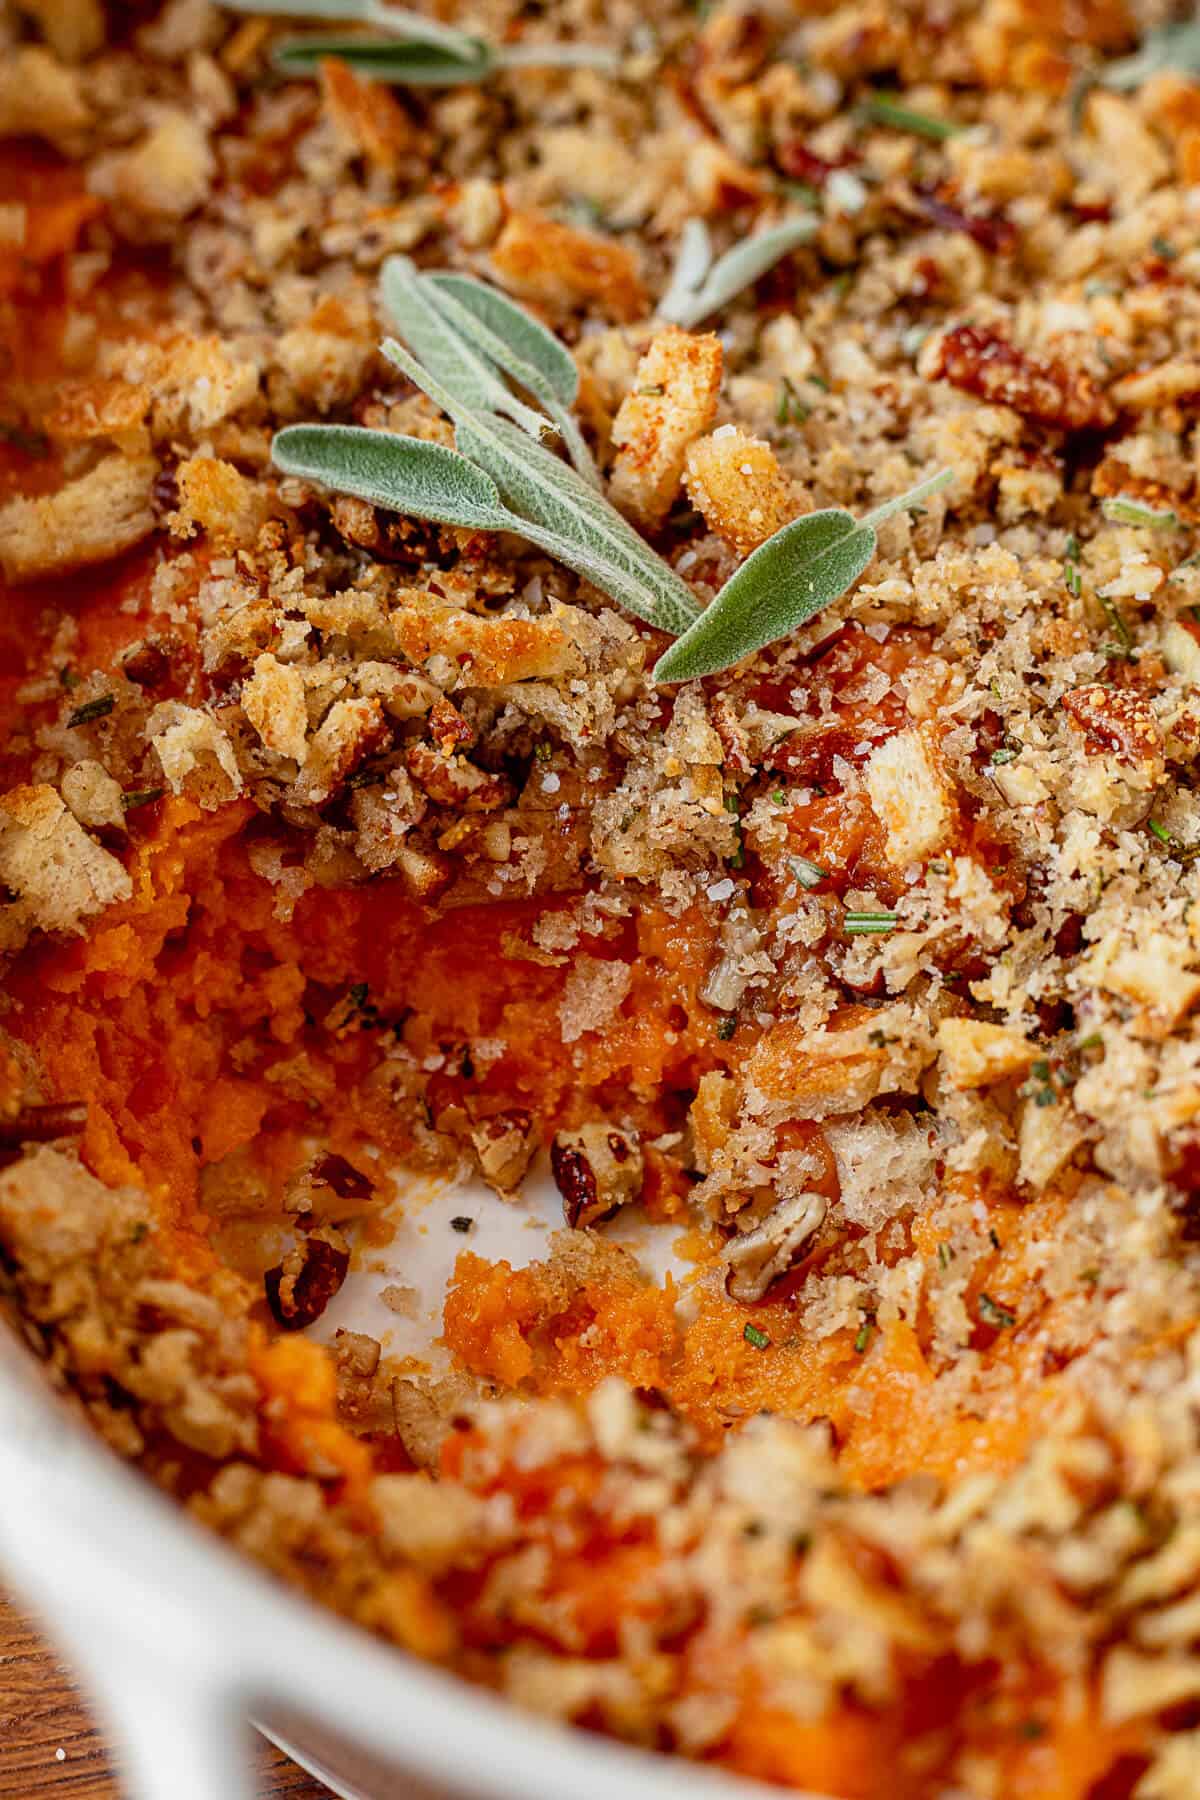 savory sweet potato casserole with a scoop missing so you can see the topping and filling